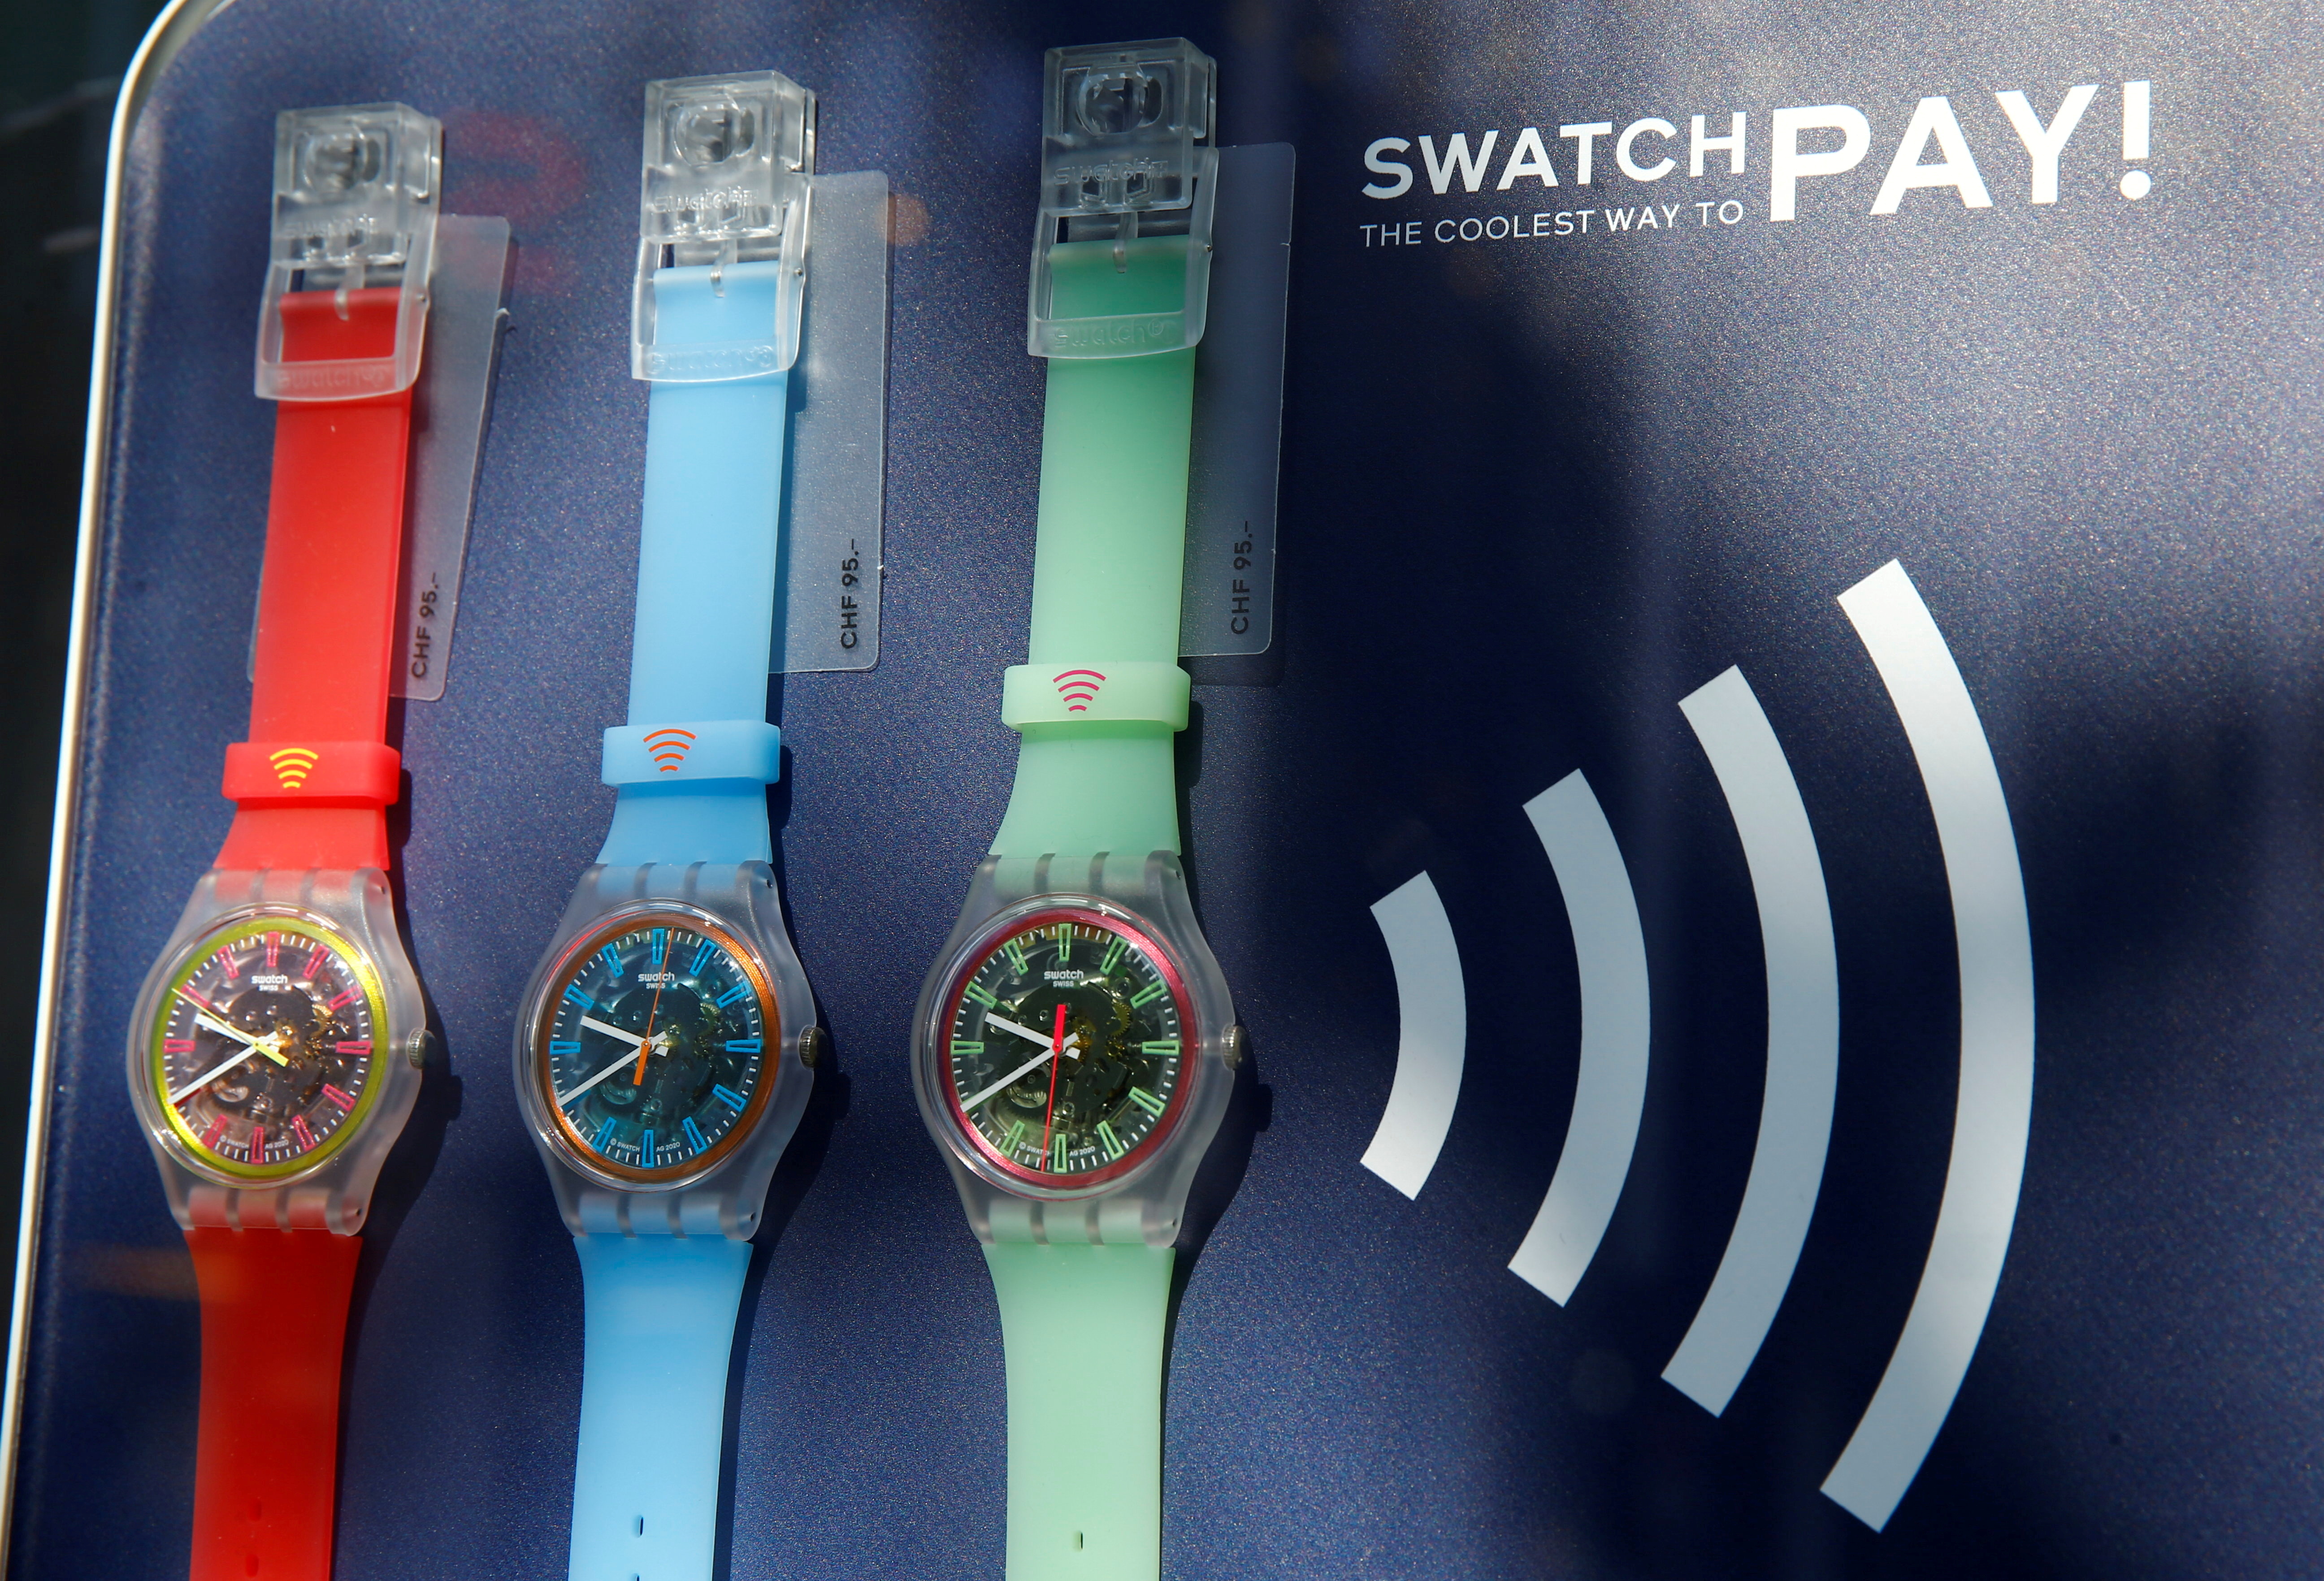 SwatchPAY! watches, usable for pay-by-the-wrist contactless payments, are seen at the shop of Swiss watch manufacturer Swatch in Zurich, Switzerland April 14, 2021. REUTERS/Arnd Wiegmann/File Photo 